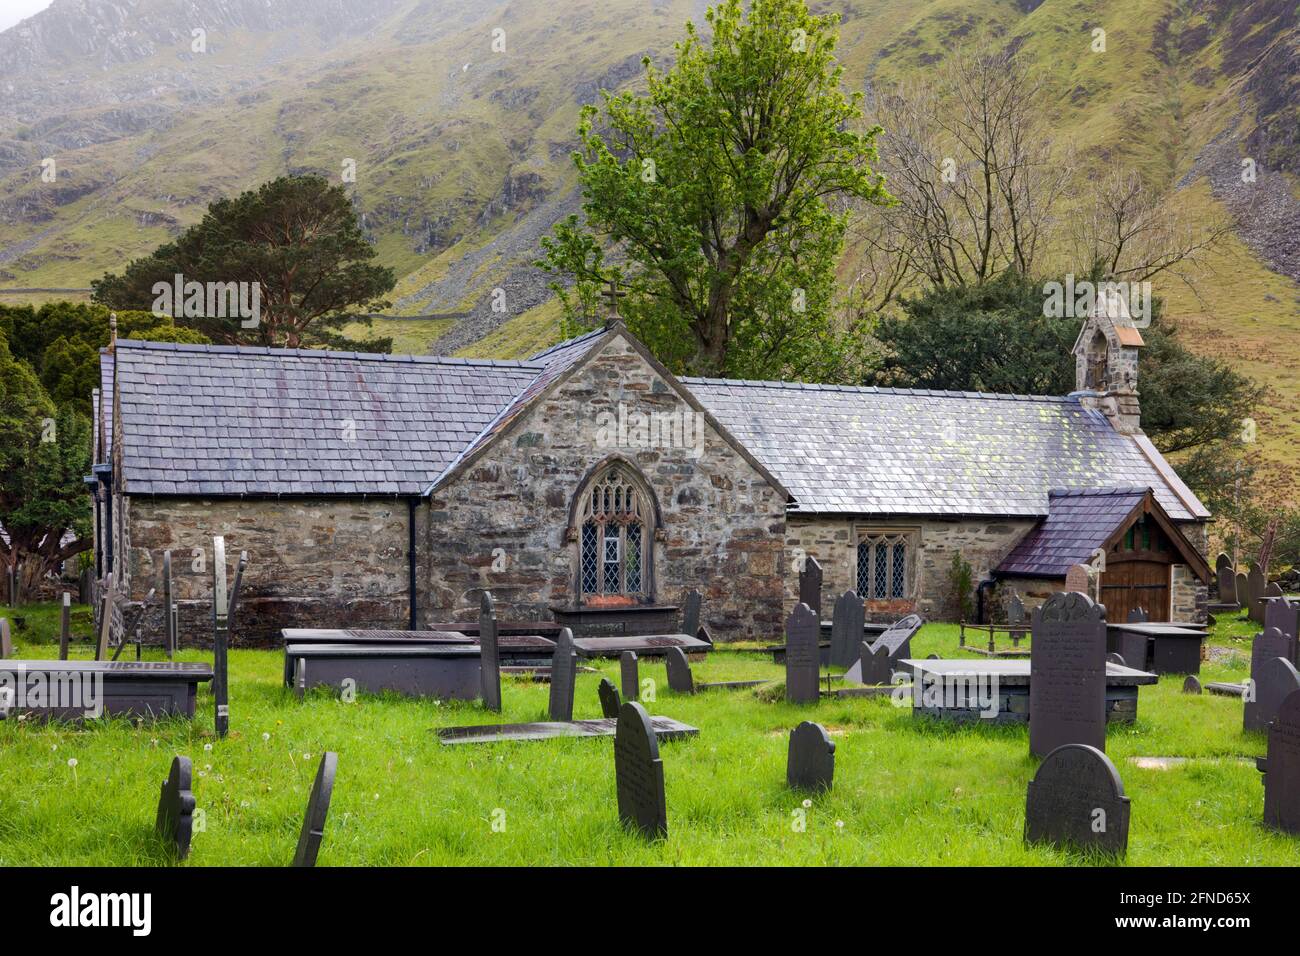 St Peris Church in the village Nant Peris, Snowdonia, North Wales, dates from at least the 14th century. Stock Photo